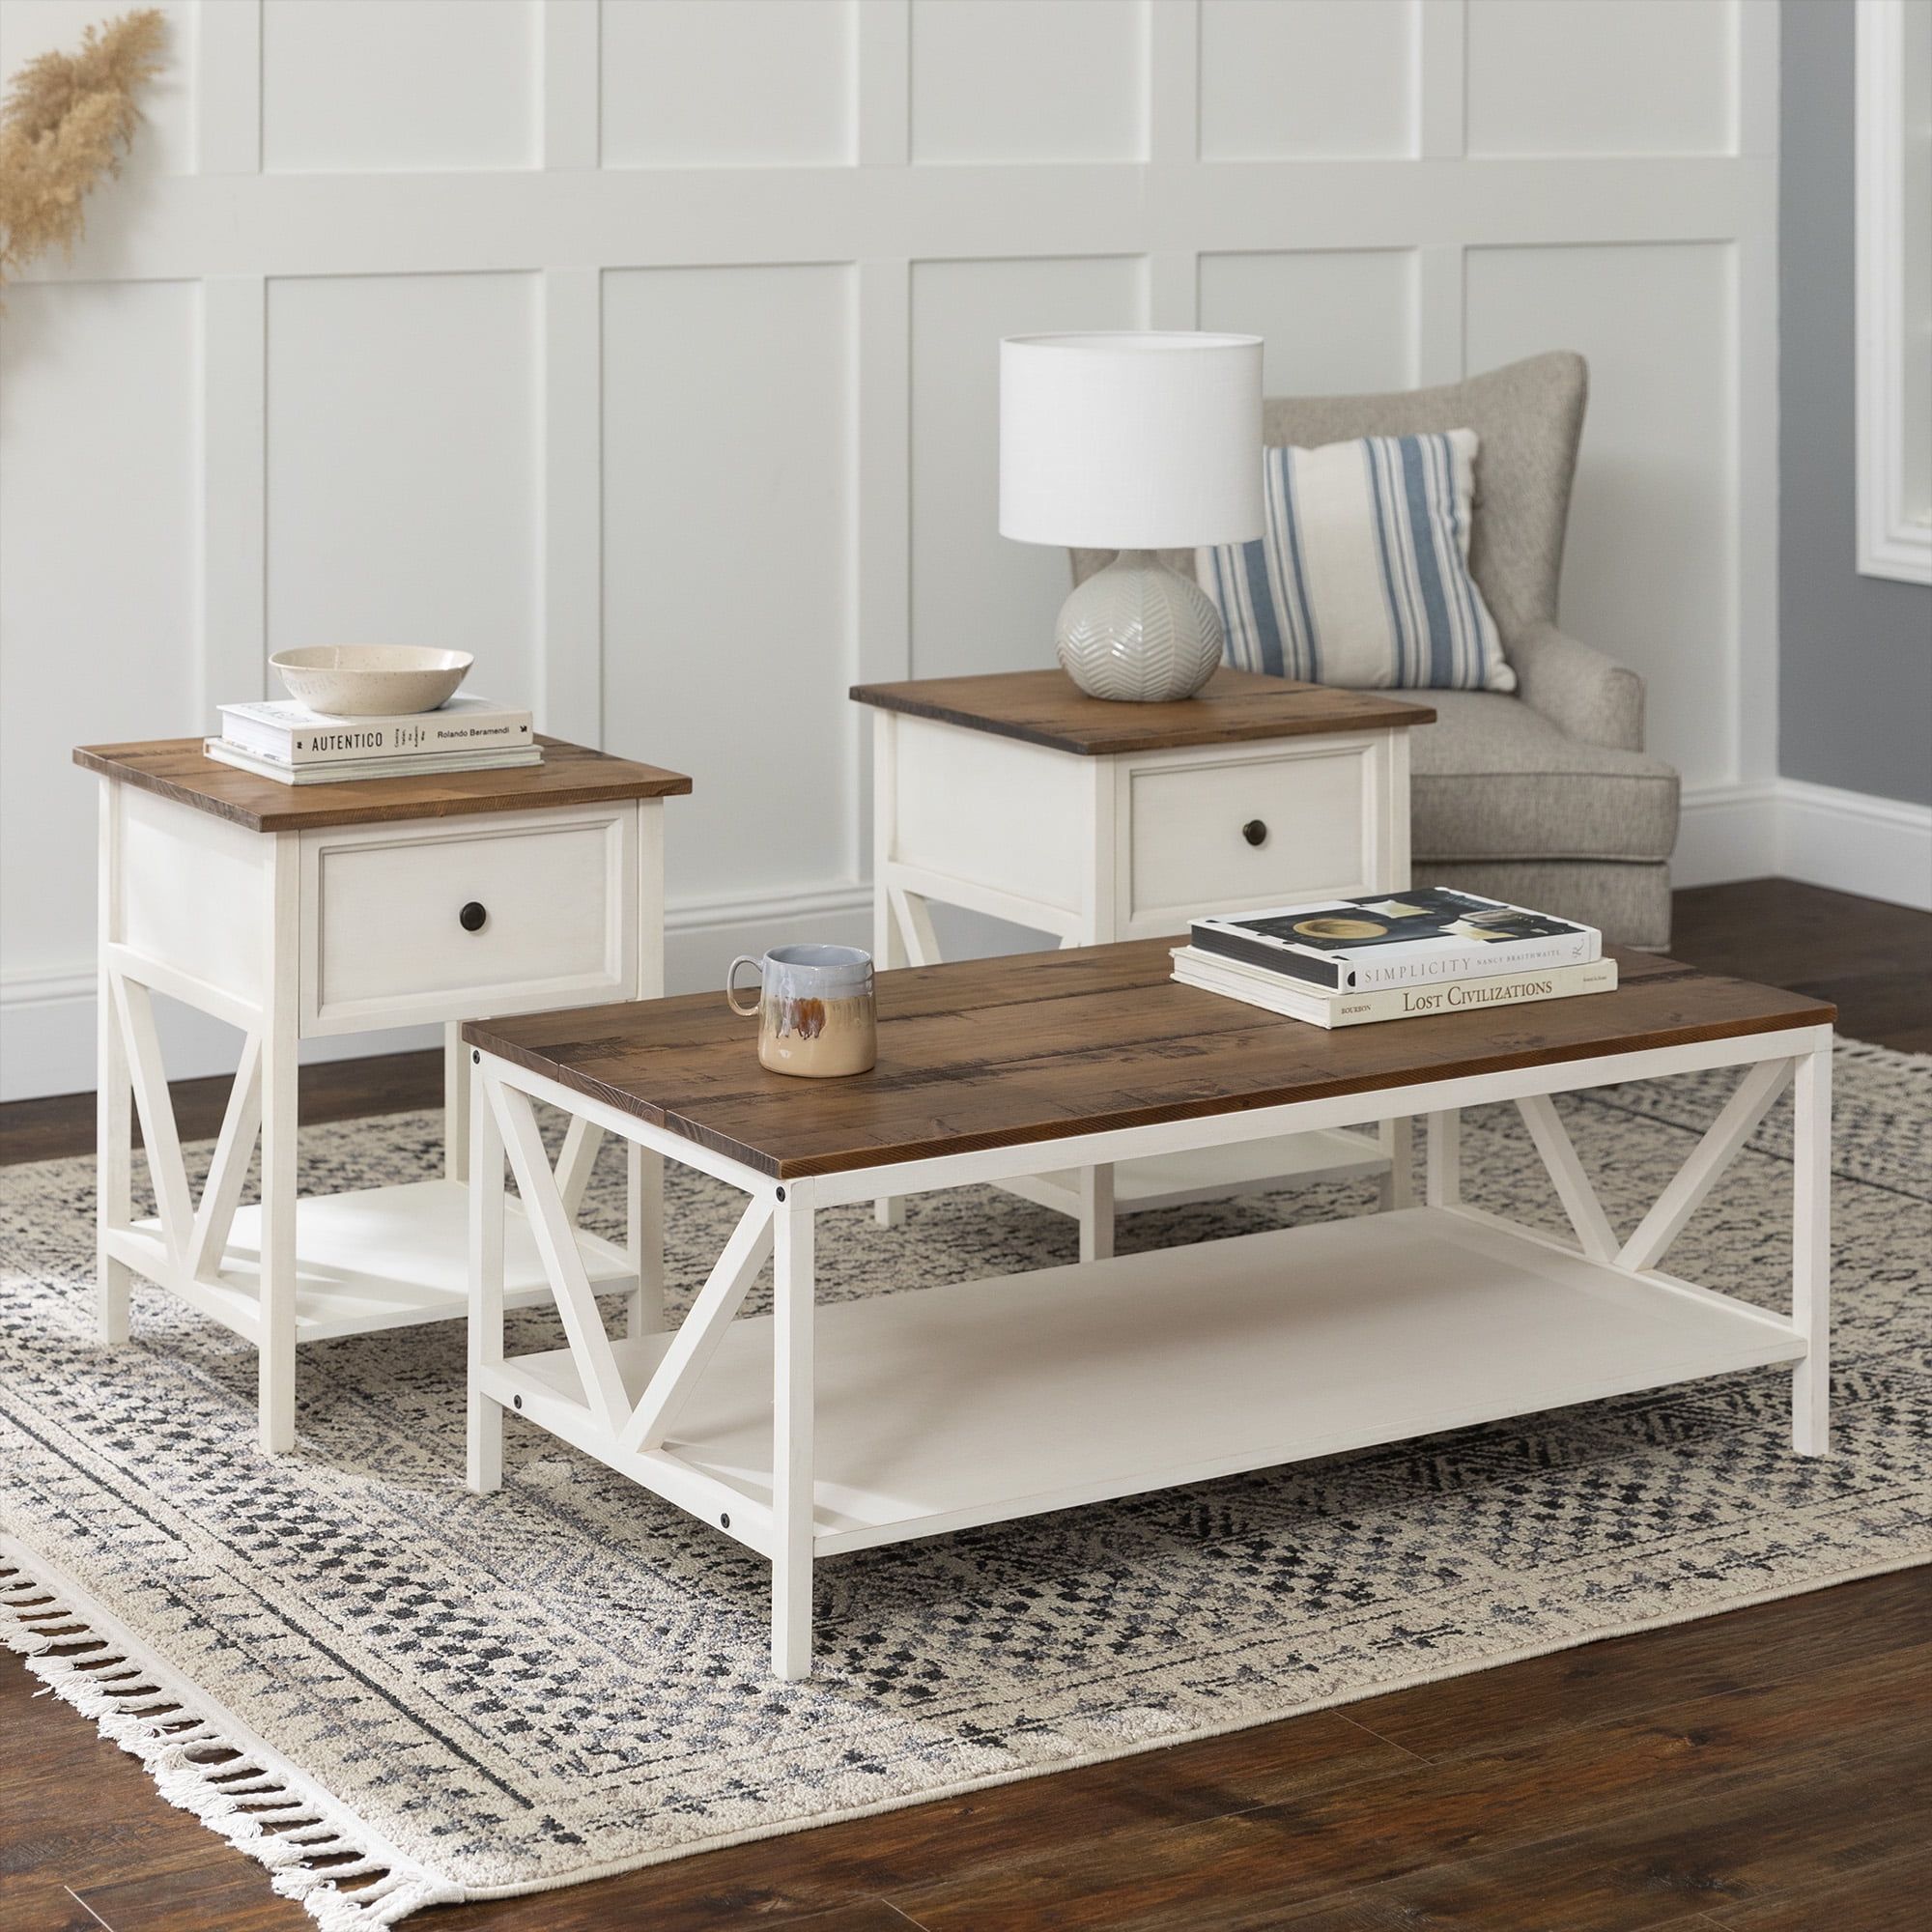 Modern Farmhouse Accent Table Set, Distressed White – Walmart Pertaining To Modern Farmhouse Coffee Table Sets (View 4 of 20)